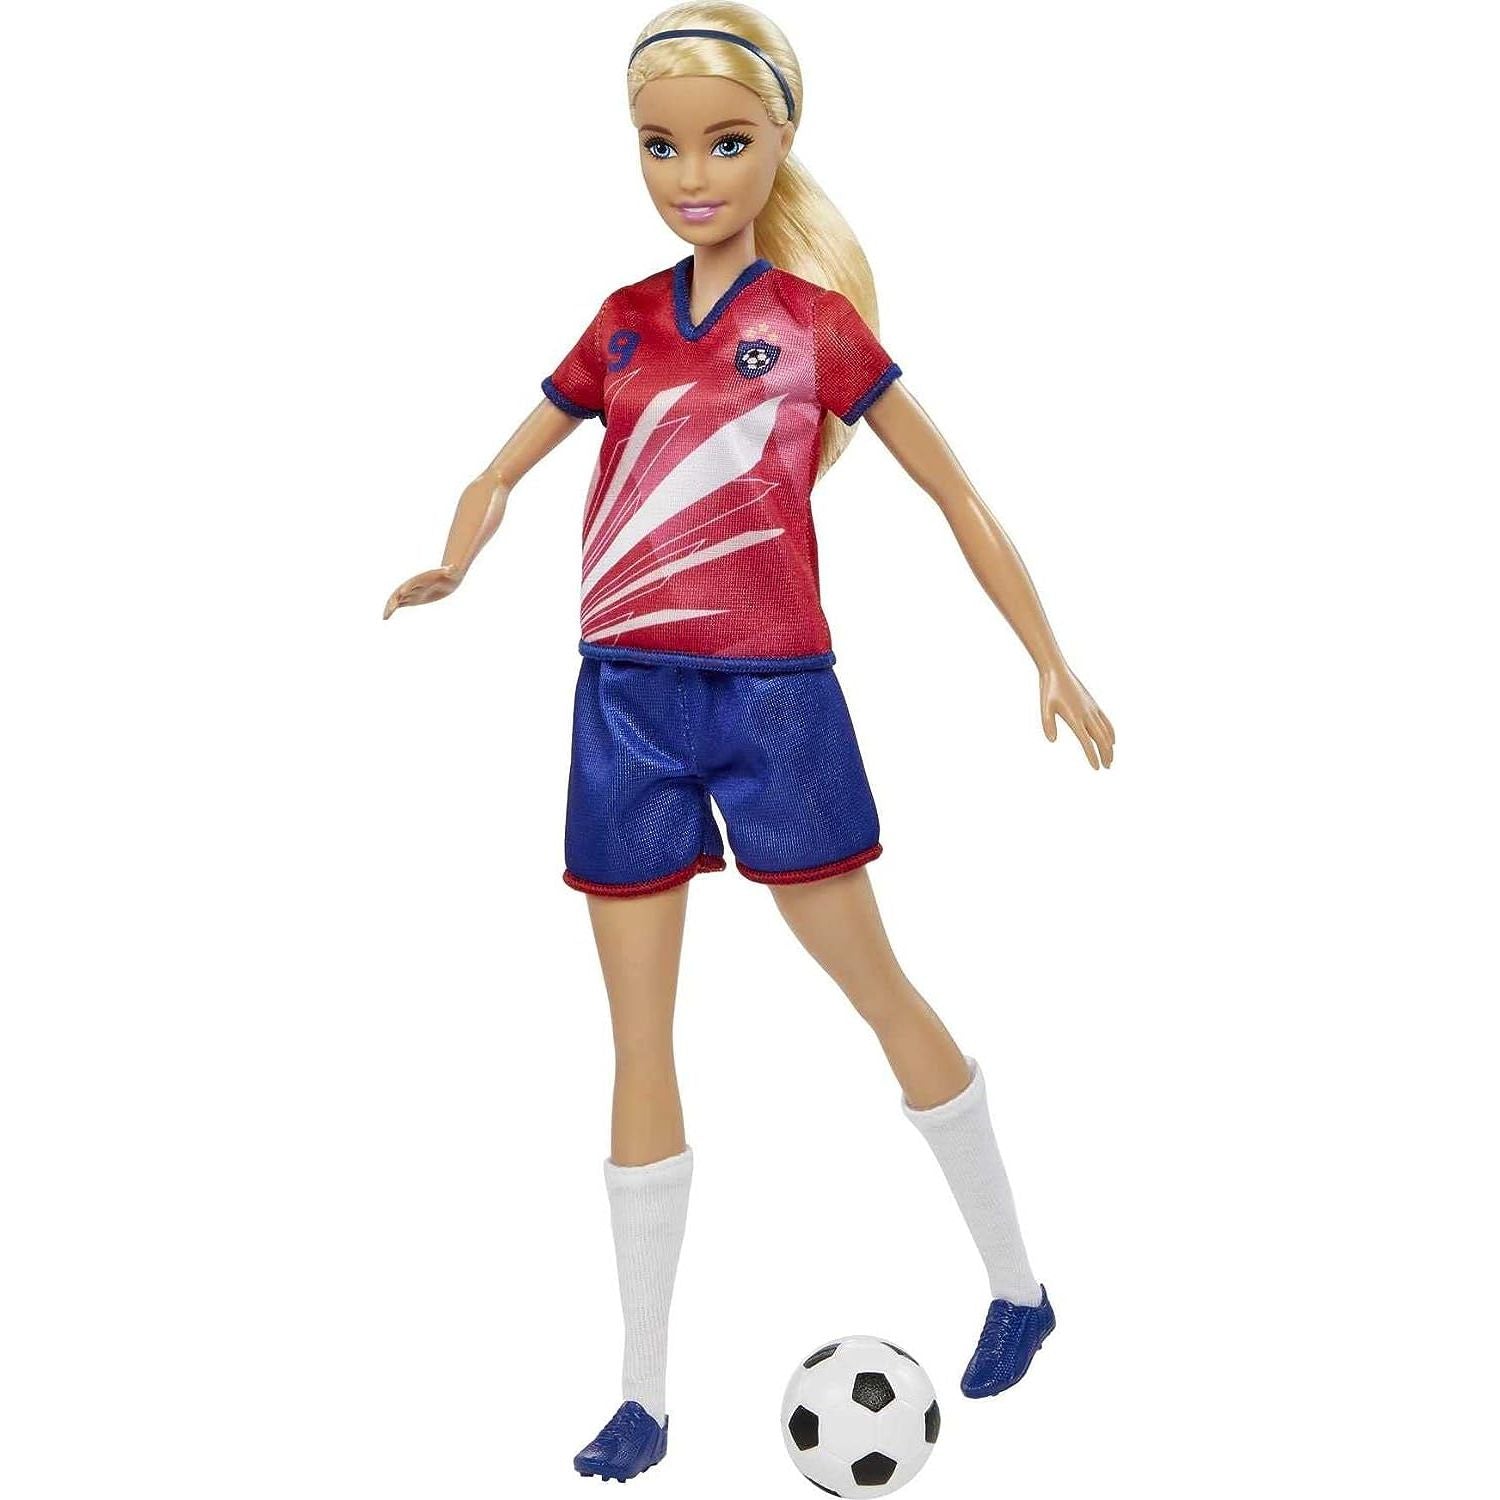 Mattel Barbie Soccer Fashion Doll with Blonde Ponytail, Colorful #9 Uniform, Cleats & Tall Socks, Soccer Ball 11.5 inches